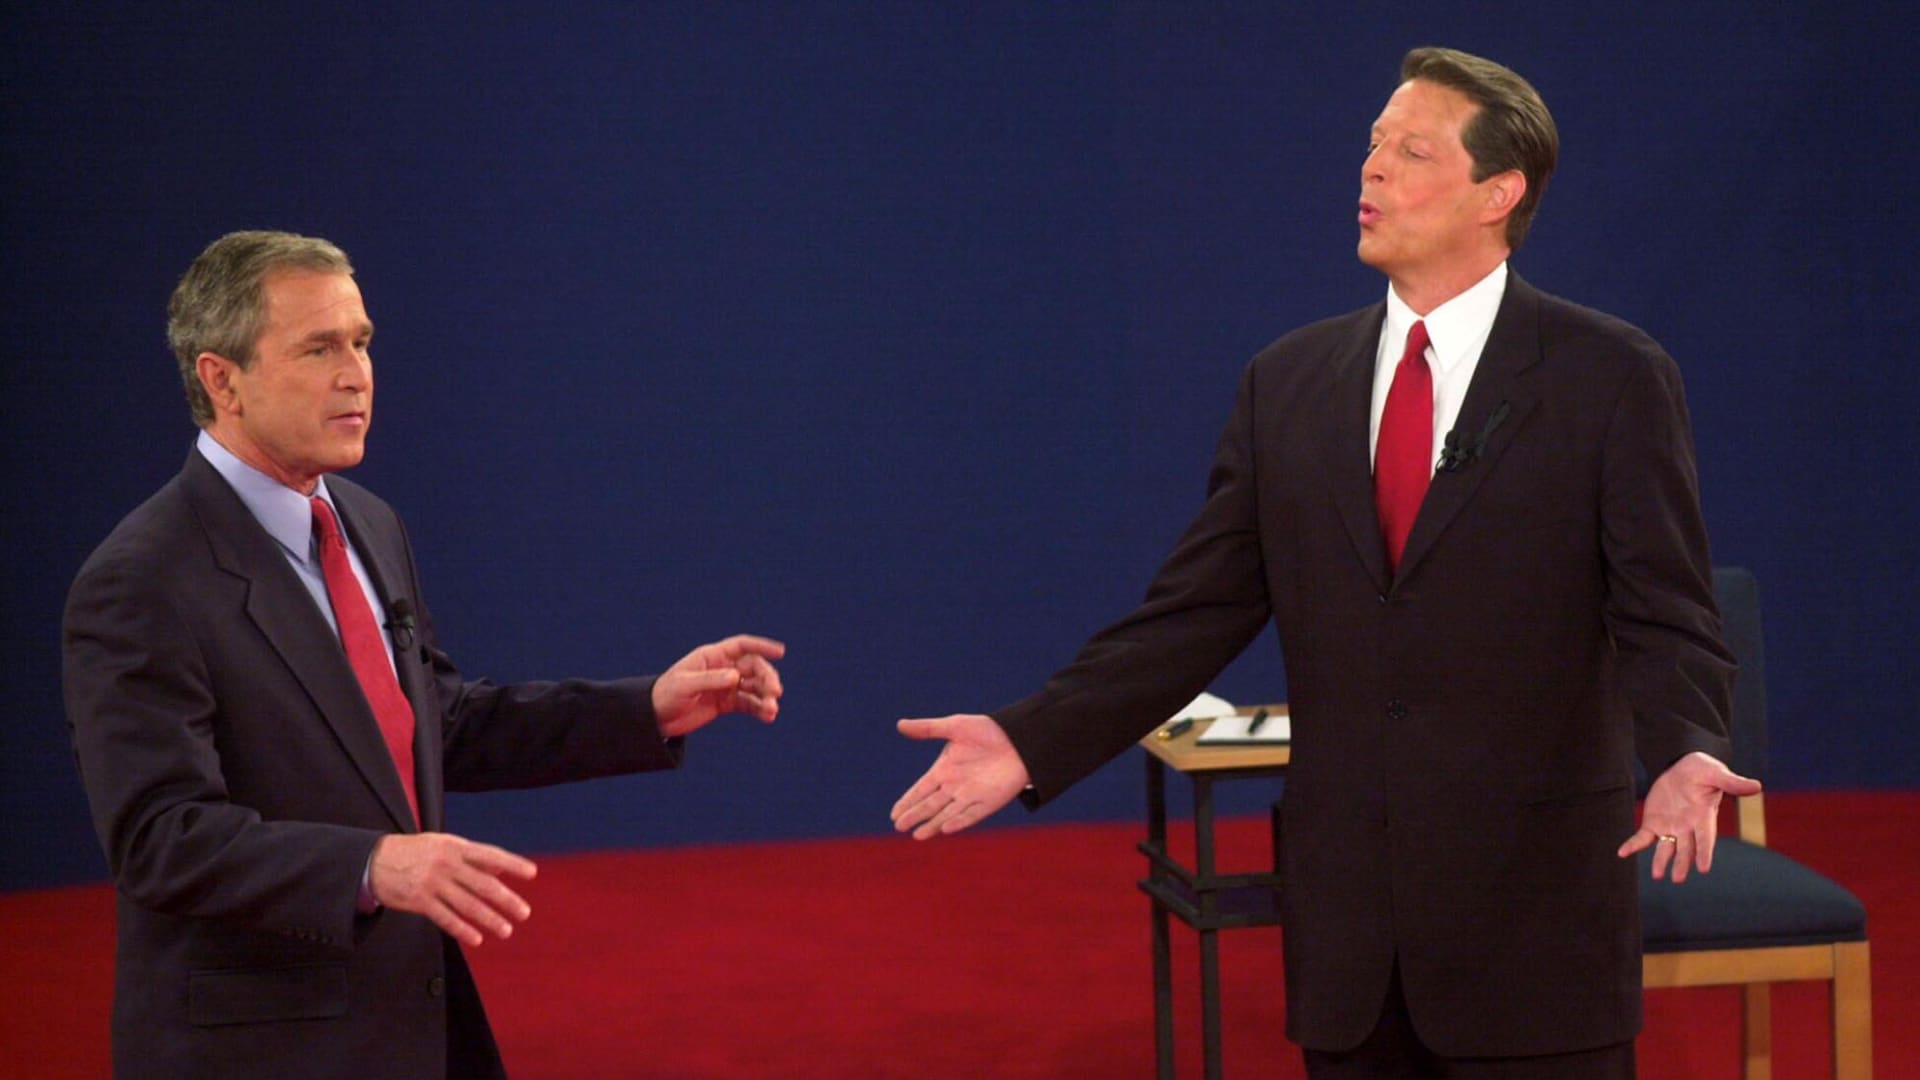 Republican presidential nominee George W. Bush (L) and Democratic presidential nominee Al Gore talk during their third debate at Washington University in St. Louis, MO, 17 October, 2000.